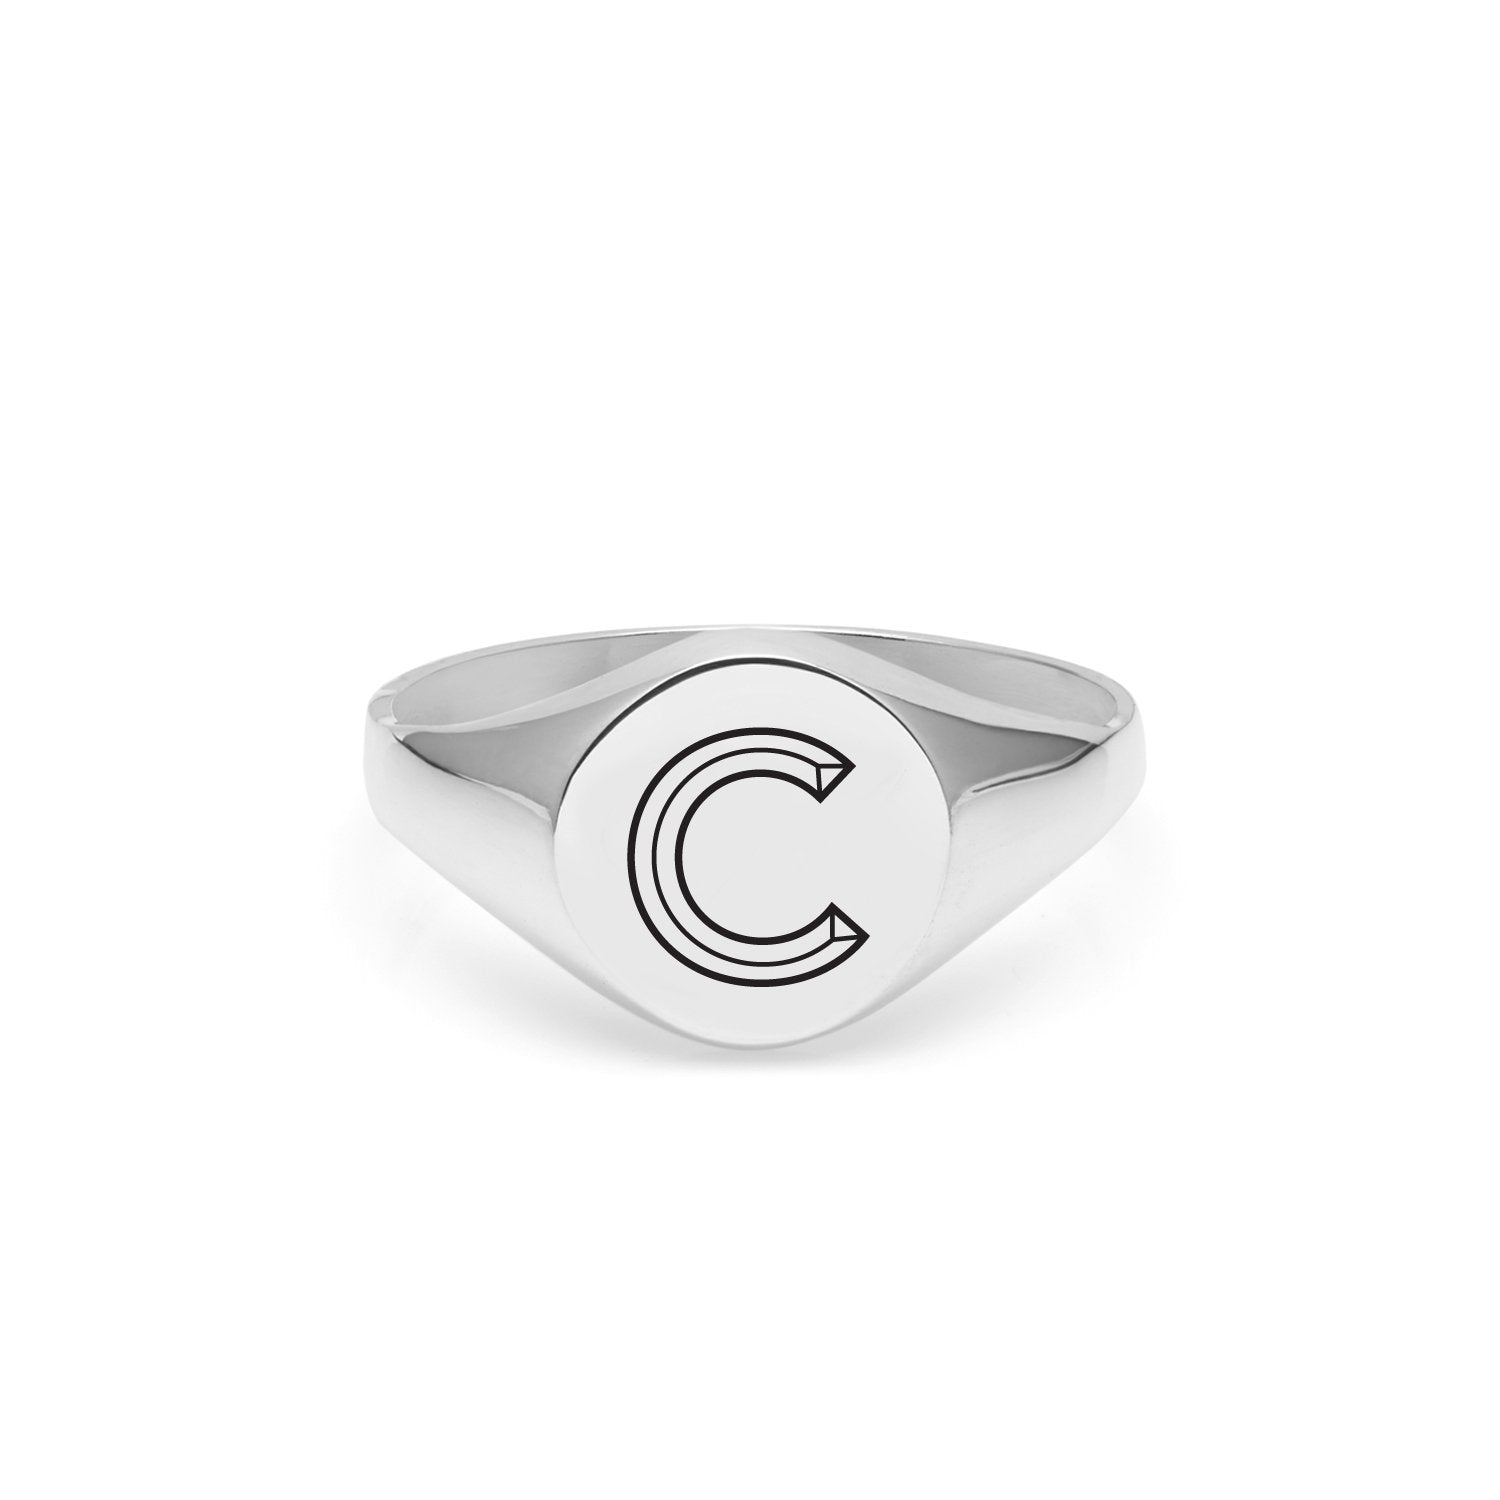 Facett Initial C Round Signet Ring - Silver - Myia Bonner Jewellery